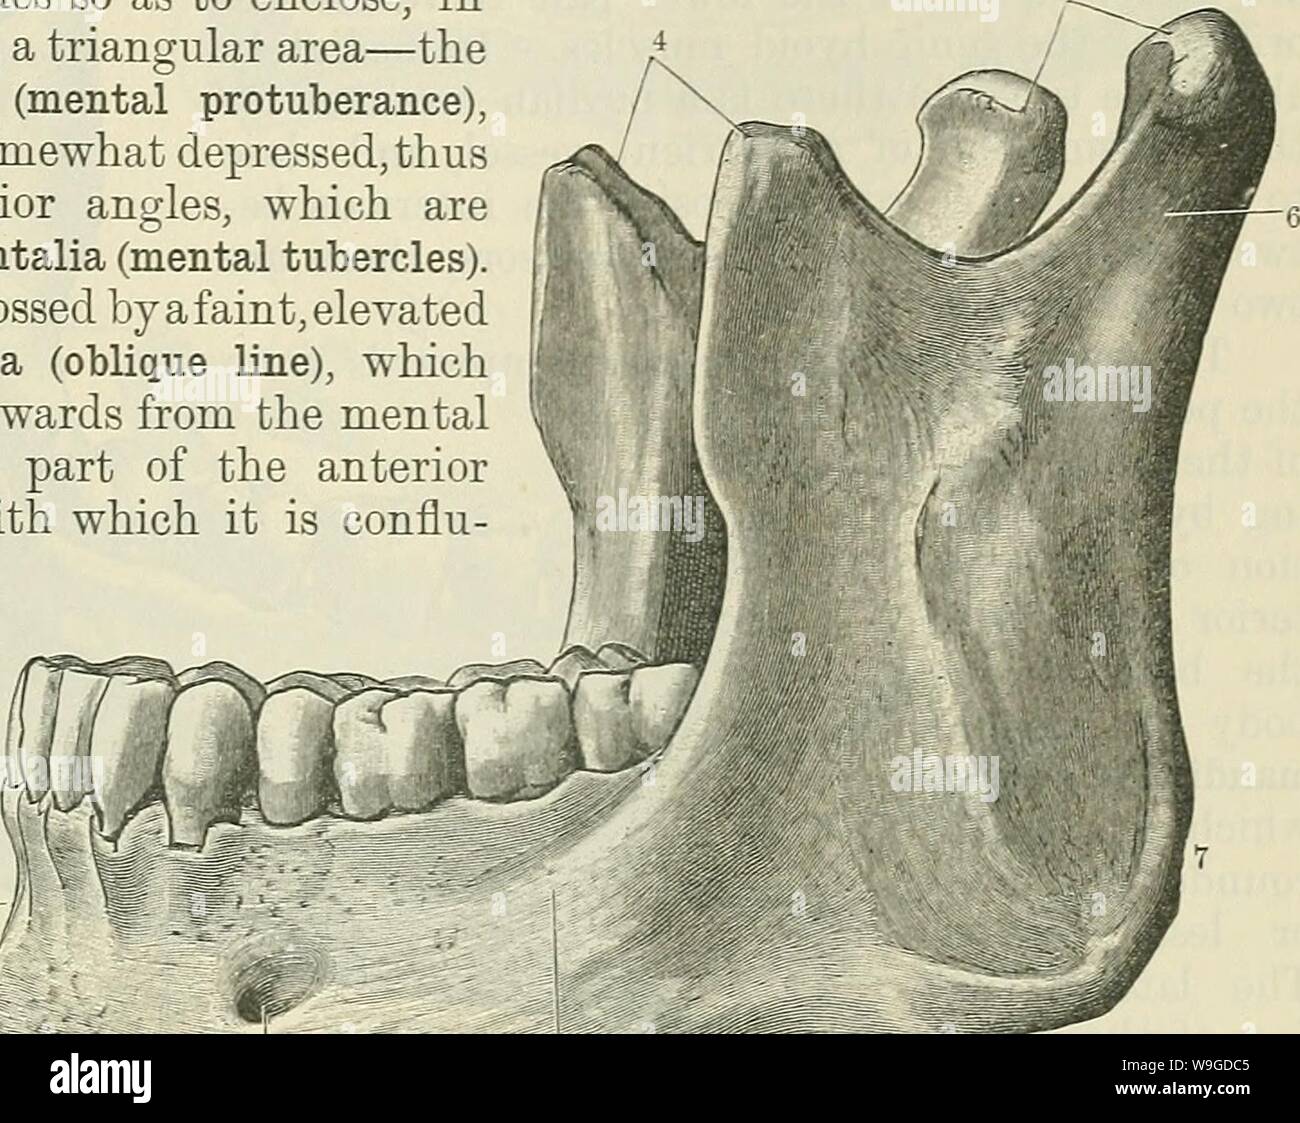 Archive image from page 188 of Cunningham's Text-book of anatomy (1914). Cunningham's Text-book of anatomy  cunninghamstextb00cunn Year: 1914 ( temporal bones. The anterior or horizontal part, which contains the teeth, is called the corpus mandibulse (body); the posterior or vertical portions constitute the rami mandibular. The body displays in the median plane, in front, a faint vertical ridge, the symphysis, which indicates the line of fusion of the two symmetrical halves from which the bone is primarily developed. In- feriorly this ridge divides so as to enclose, in well-marked specimens, a Stock Photo